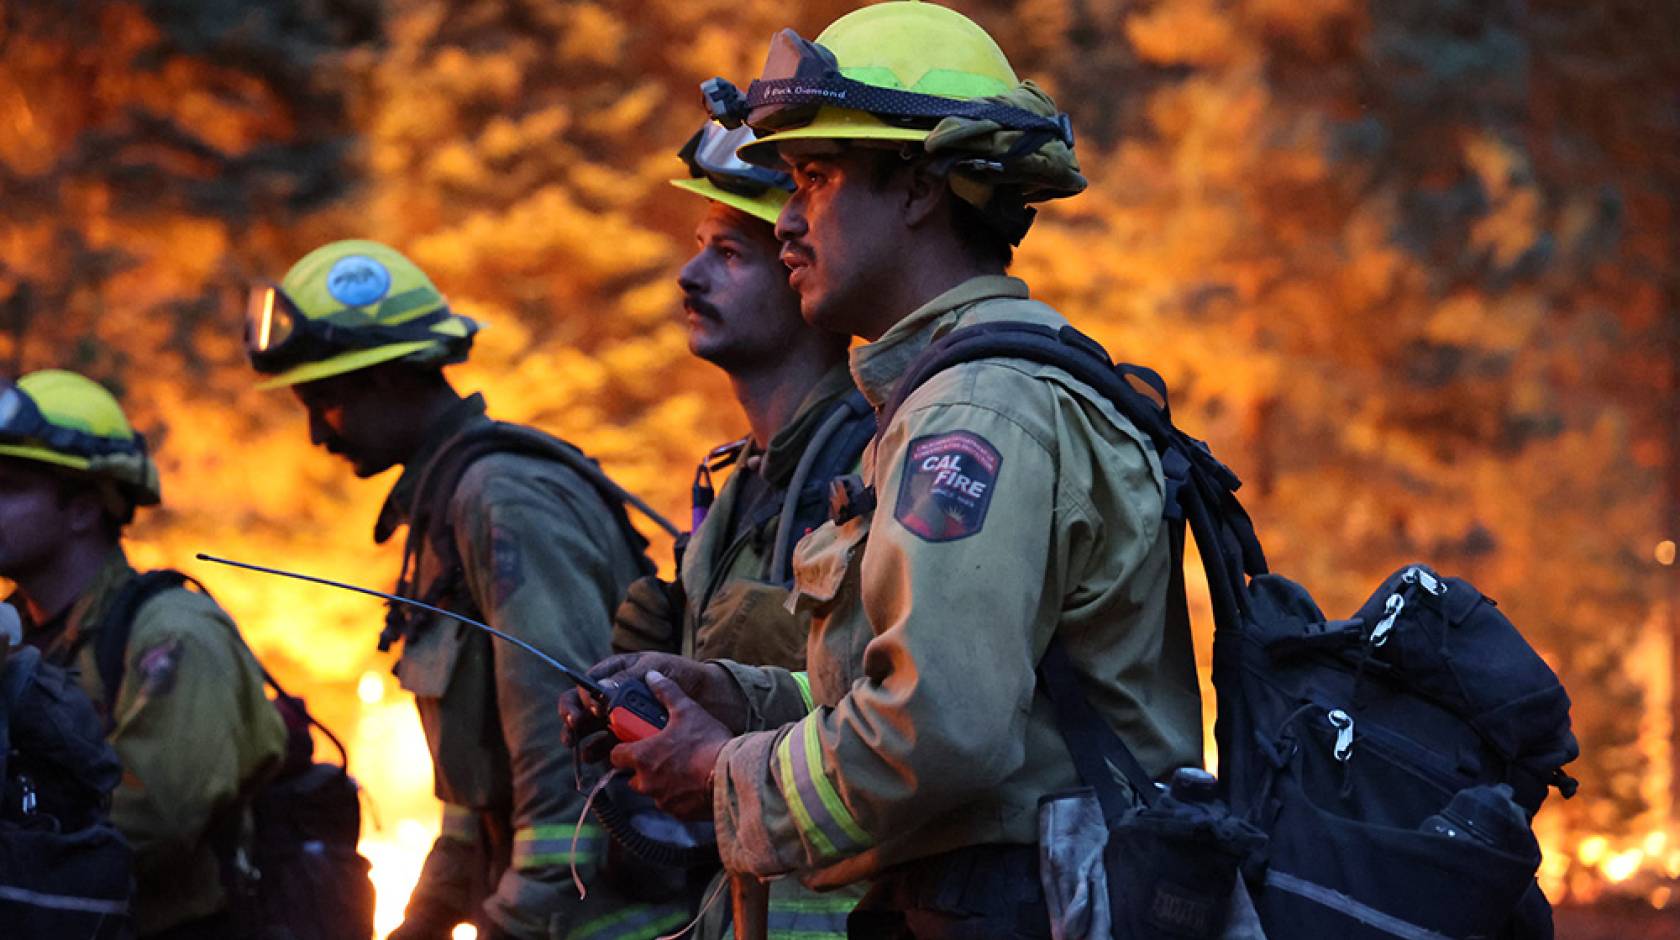 Wildland firefighters in profile, backlit by flames